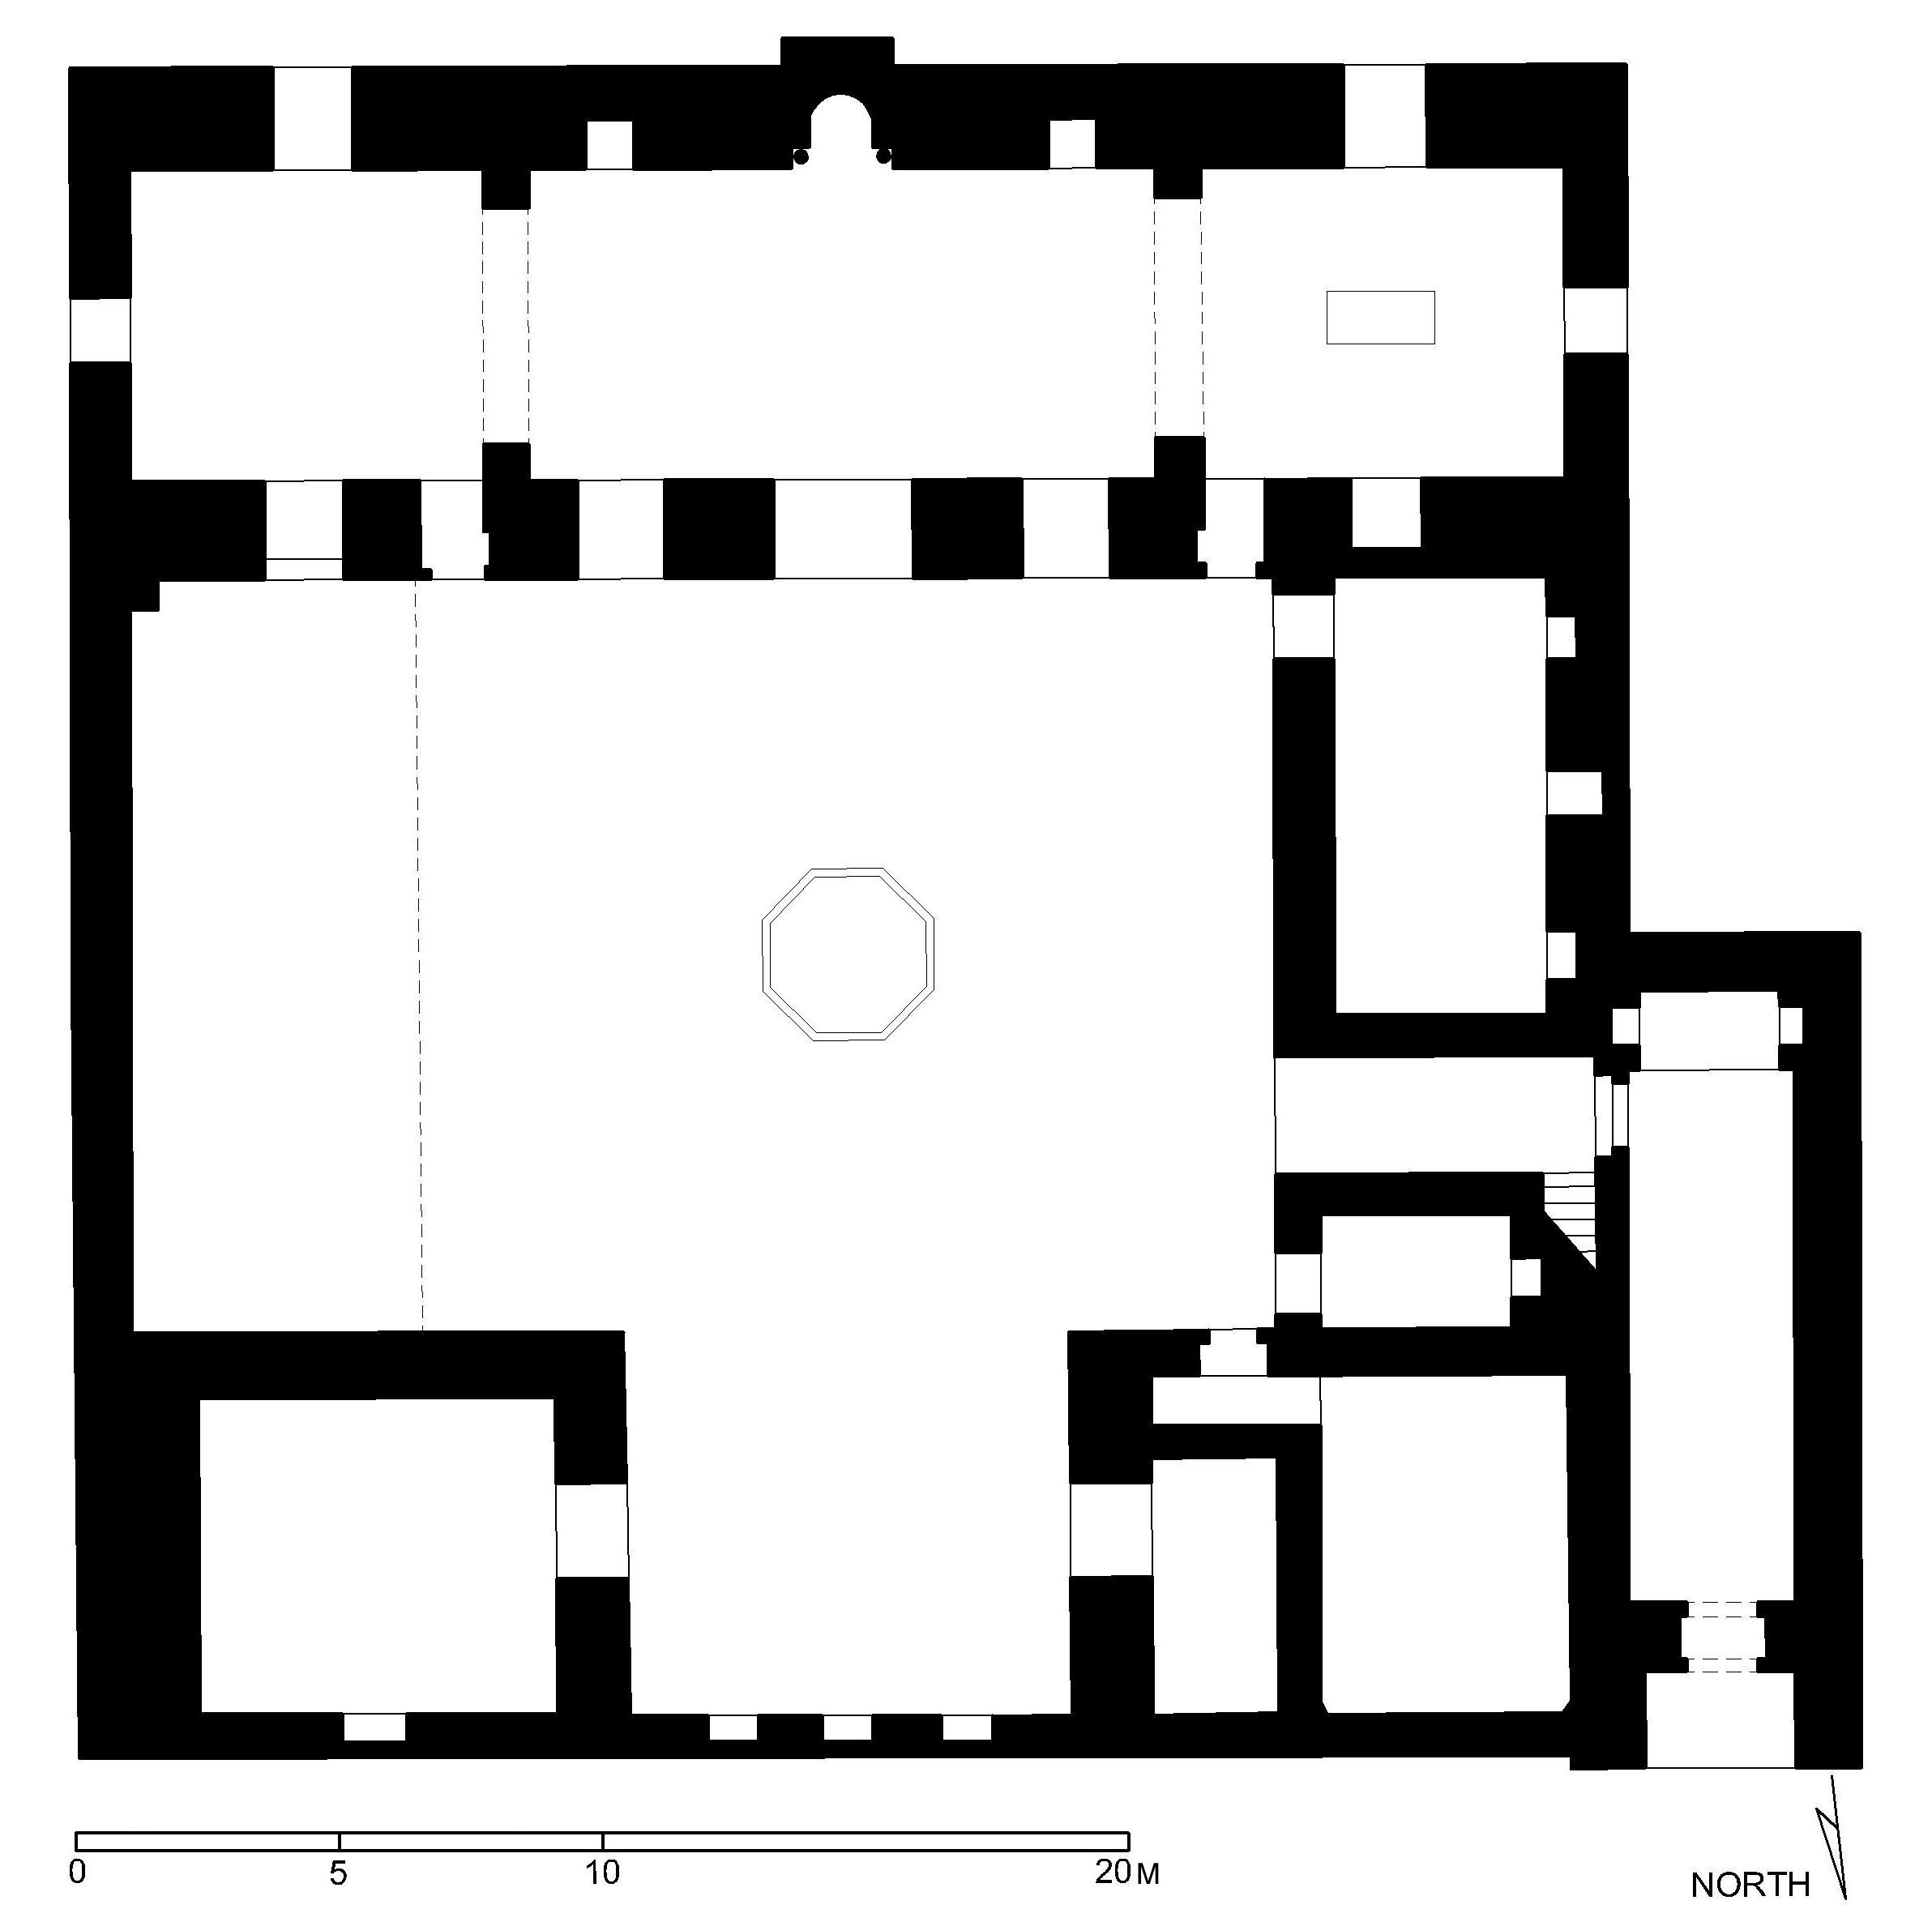 Madrasa al-Kamiliyya - Floor plan of madrasa (after Meinecke) in AutoCAD 2000 format. Click the download button to download a zipped file containing the .dwg file. 